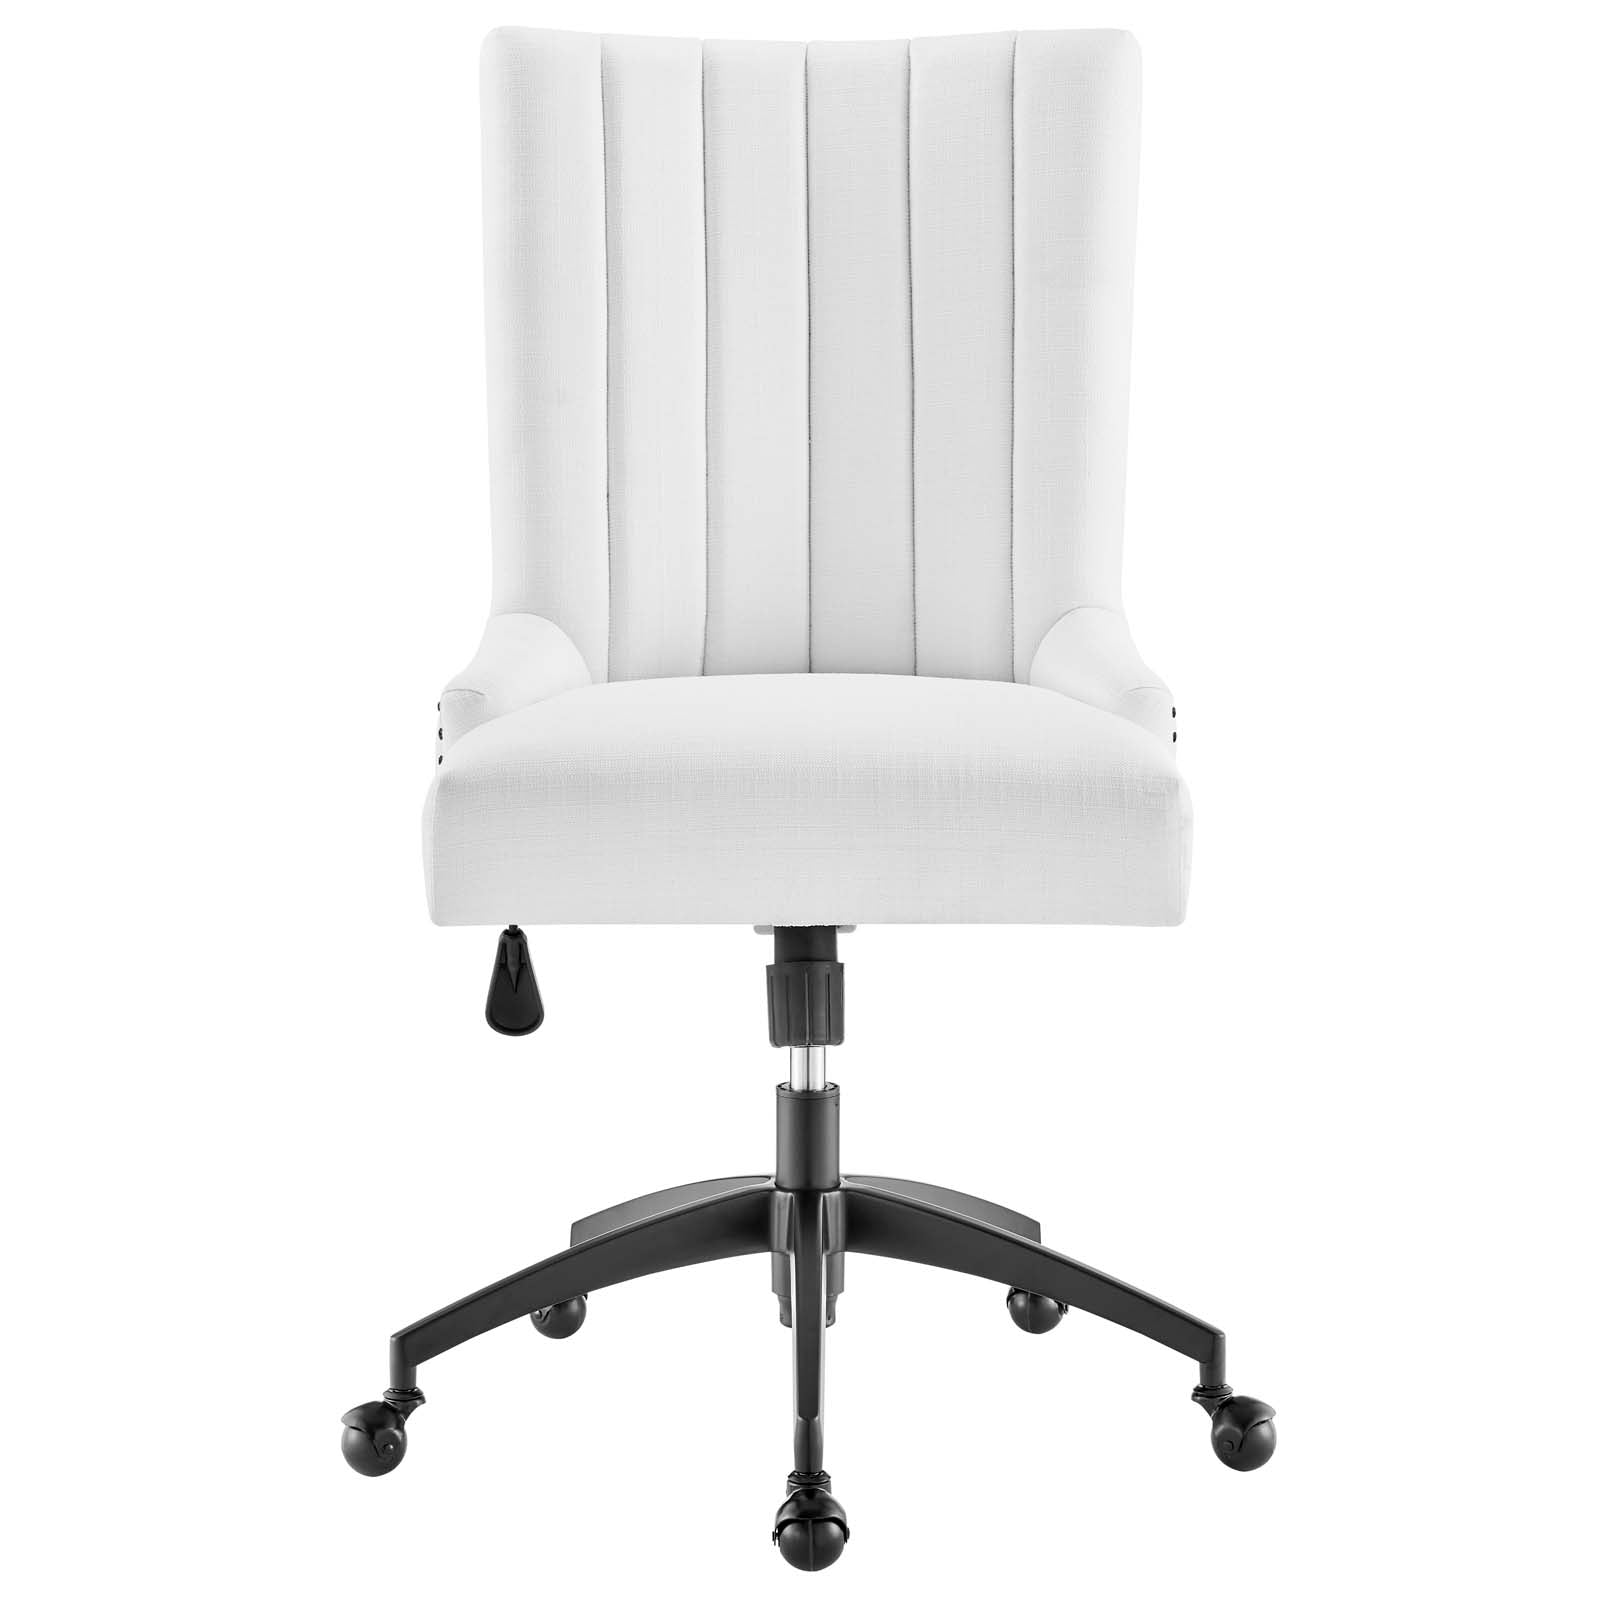 Modway Task Chairs - Empower Channel Tufted Fabric Office Chair Black White